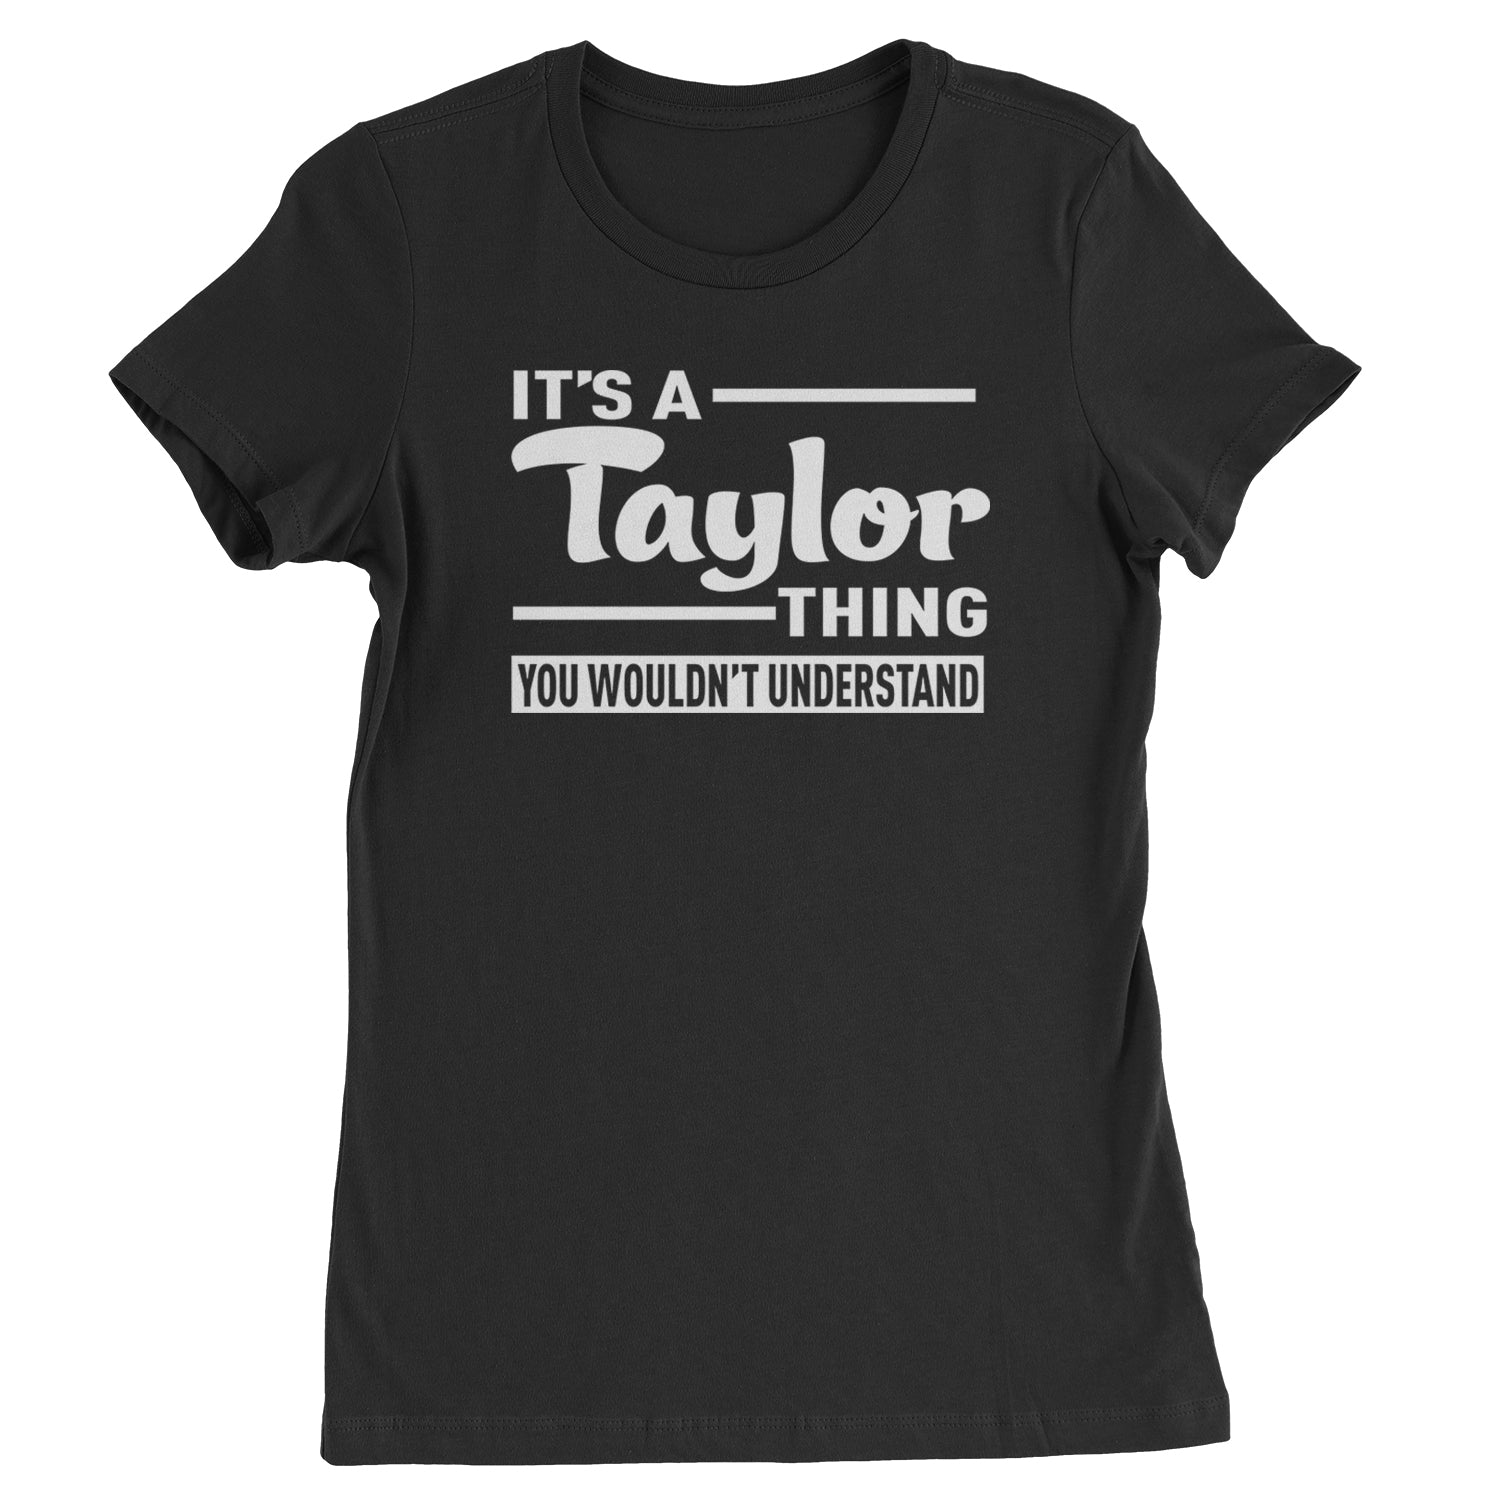 It's A Taylor Thing, You Wouldn't Understand TTPD Womens T-shirt